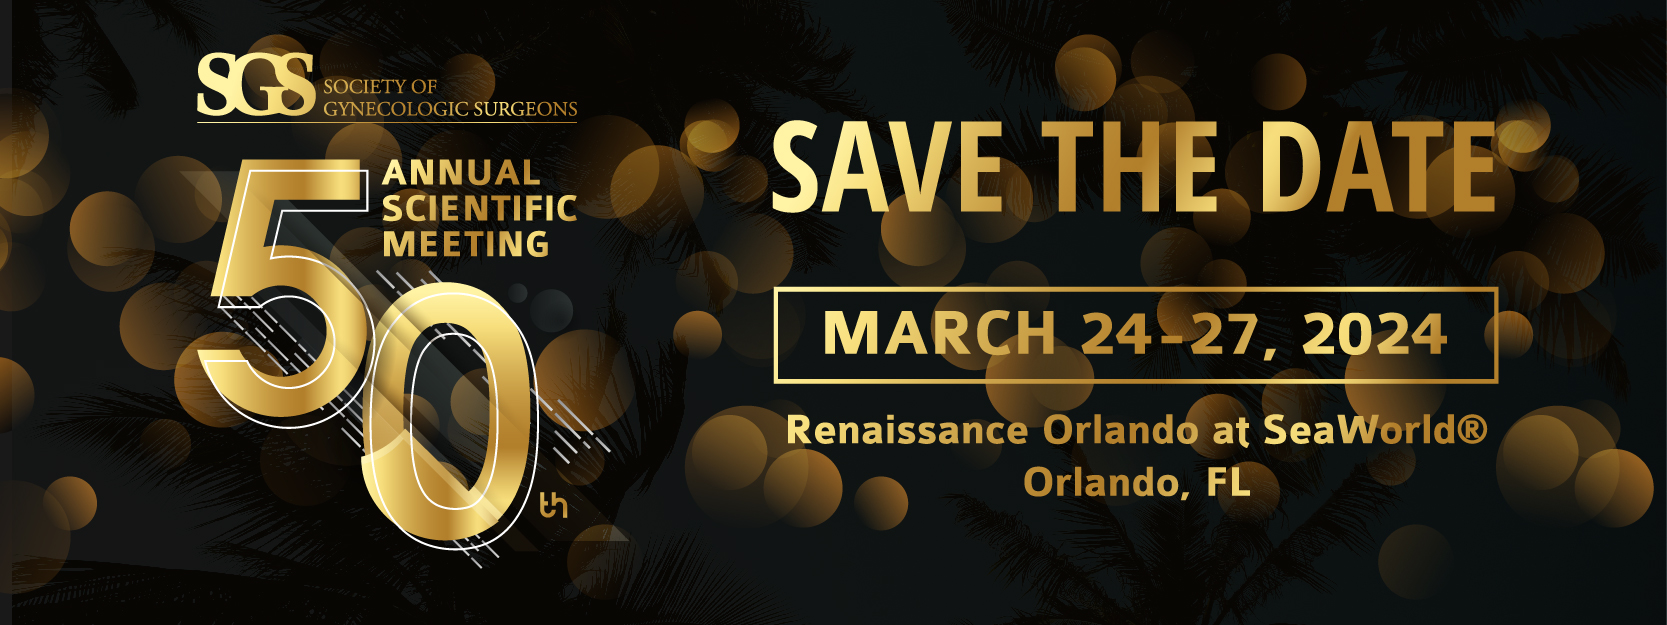 50th Annual Scientific Meeting, March 24-27, 2024